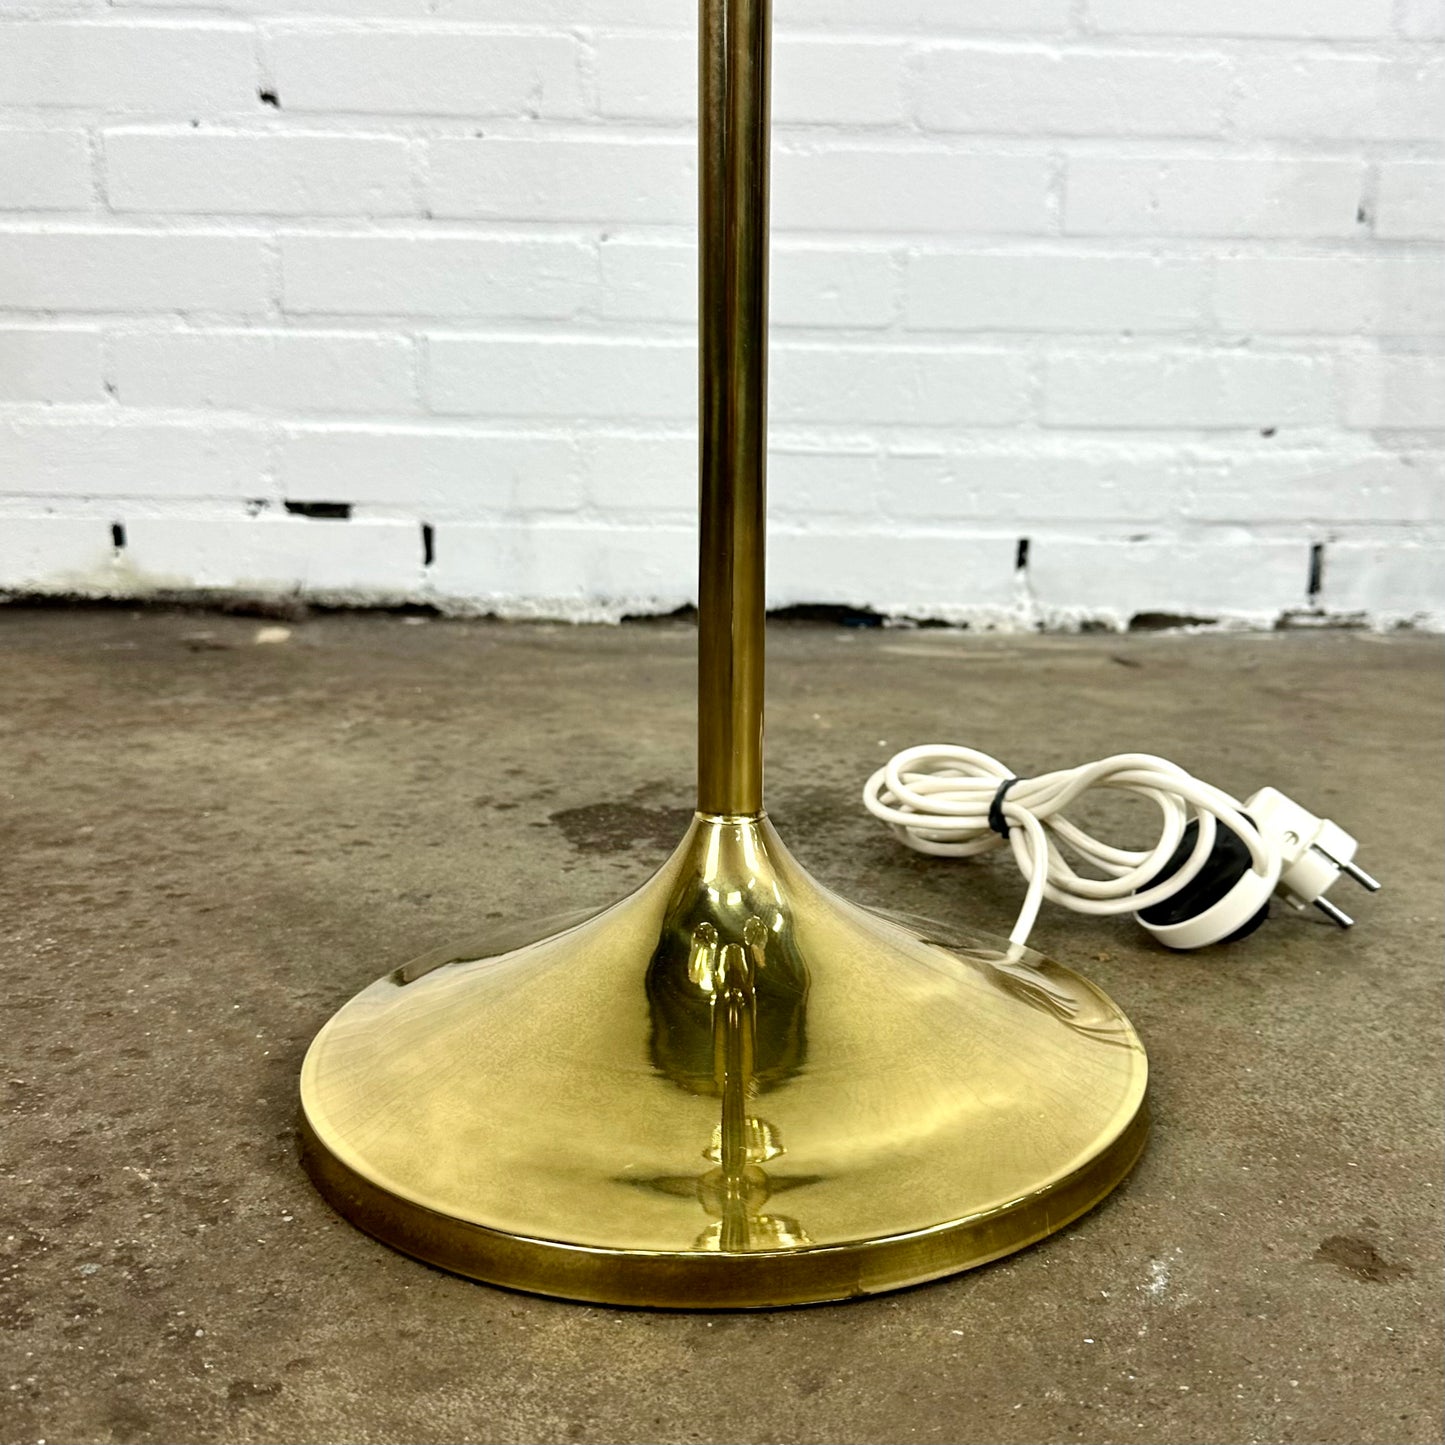 vintage-ball-table-lamp-with-brass-frame